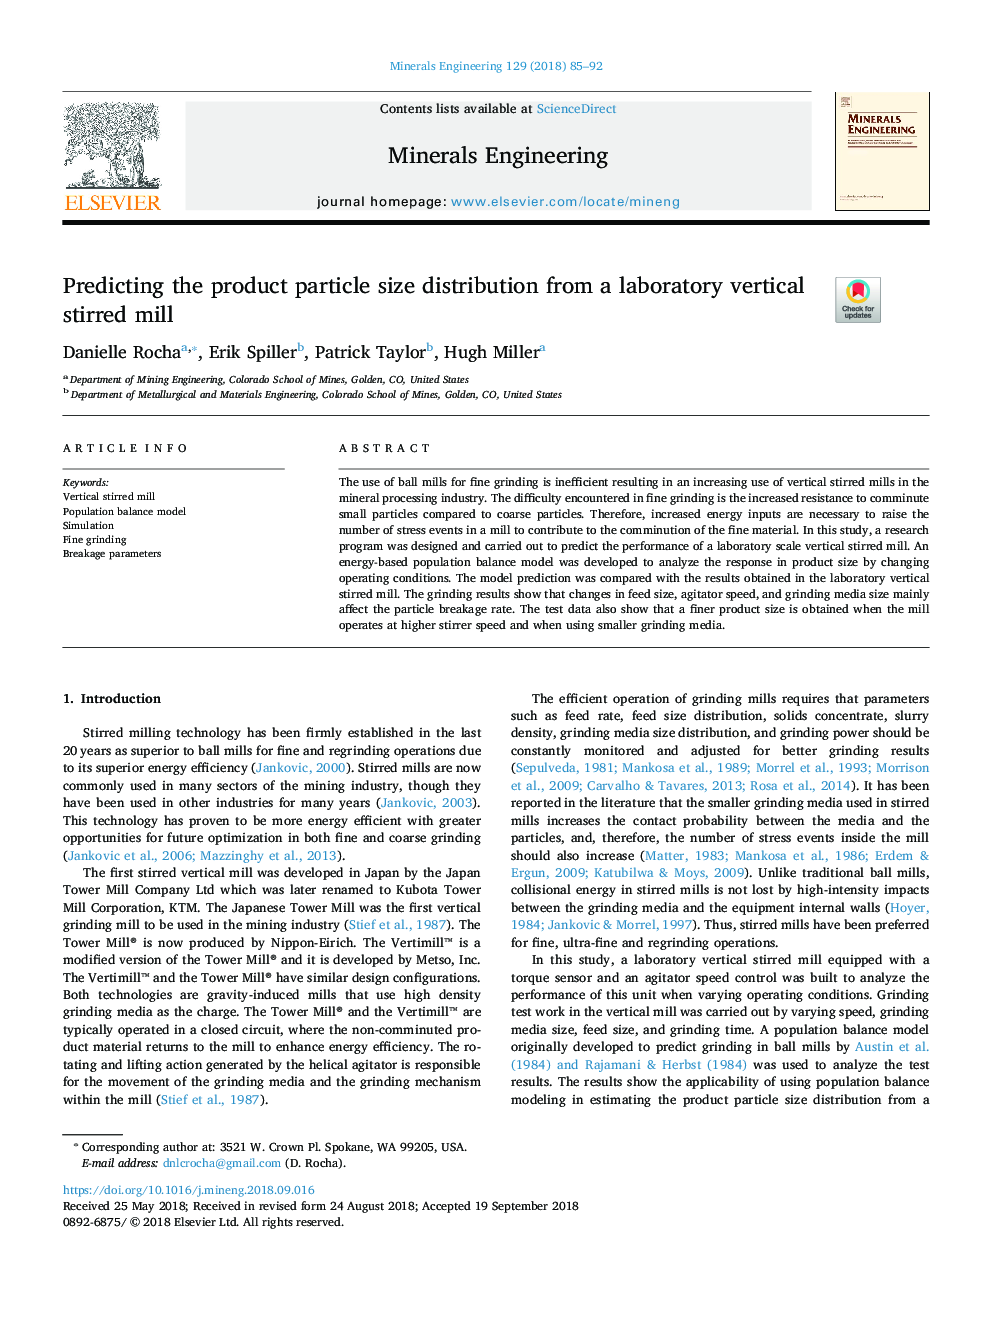 Predicting the product particle size distribution from a laboratory vertical stirred mill